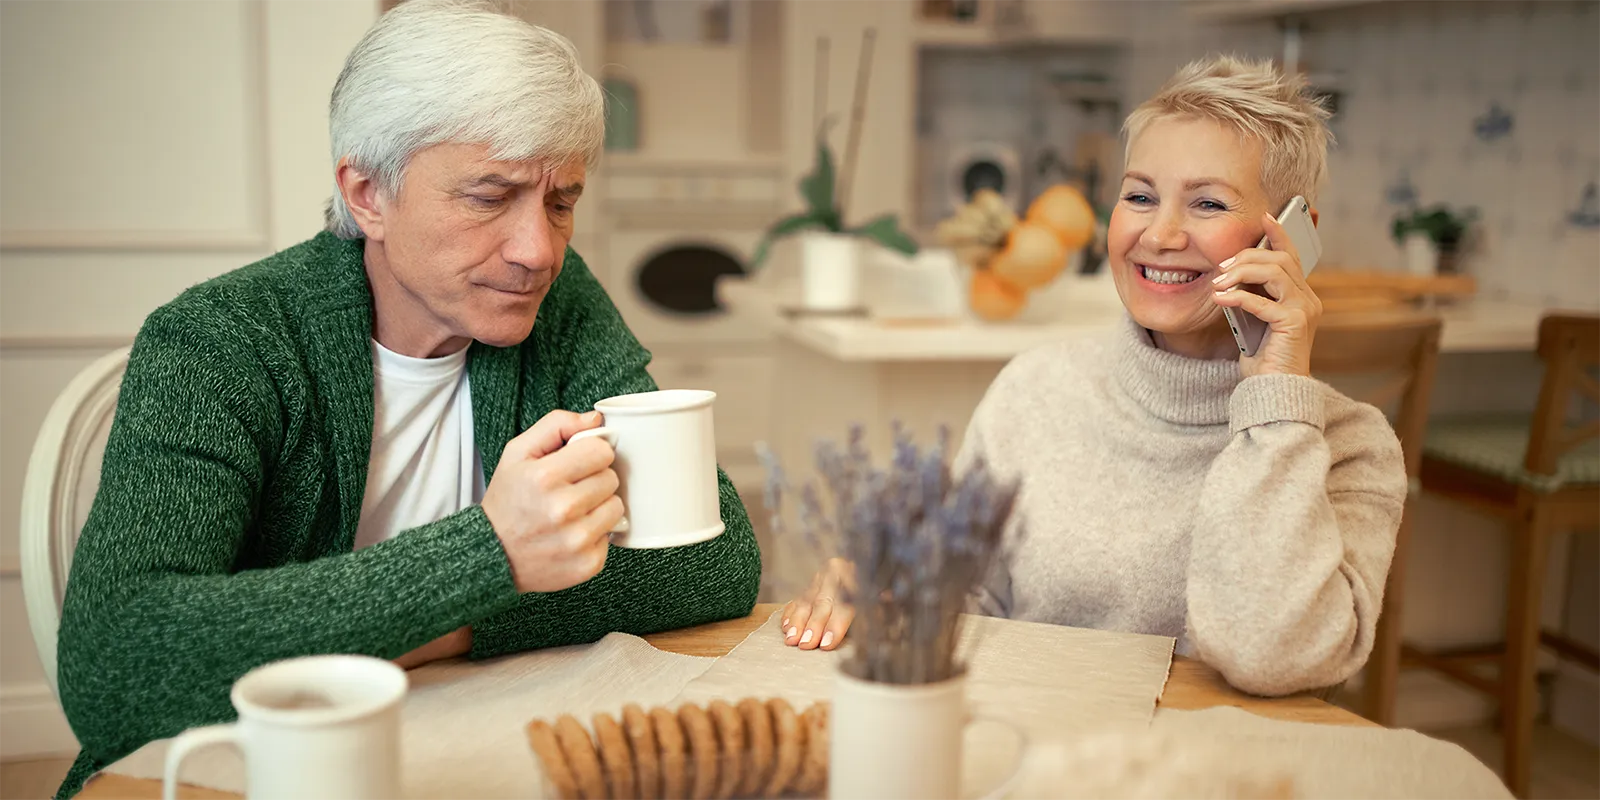 couple sitting at dining table, man drinking from mug and woman smiling while on phone